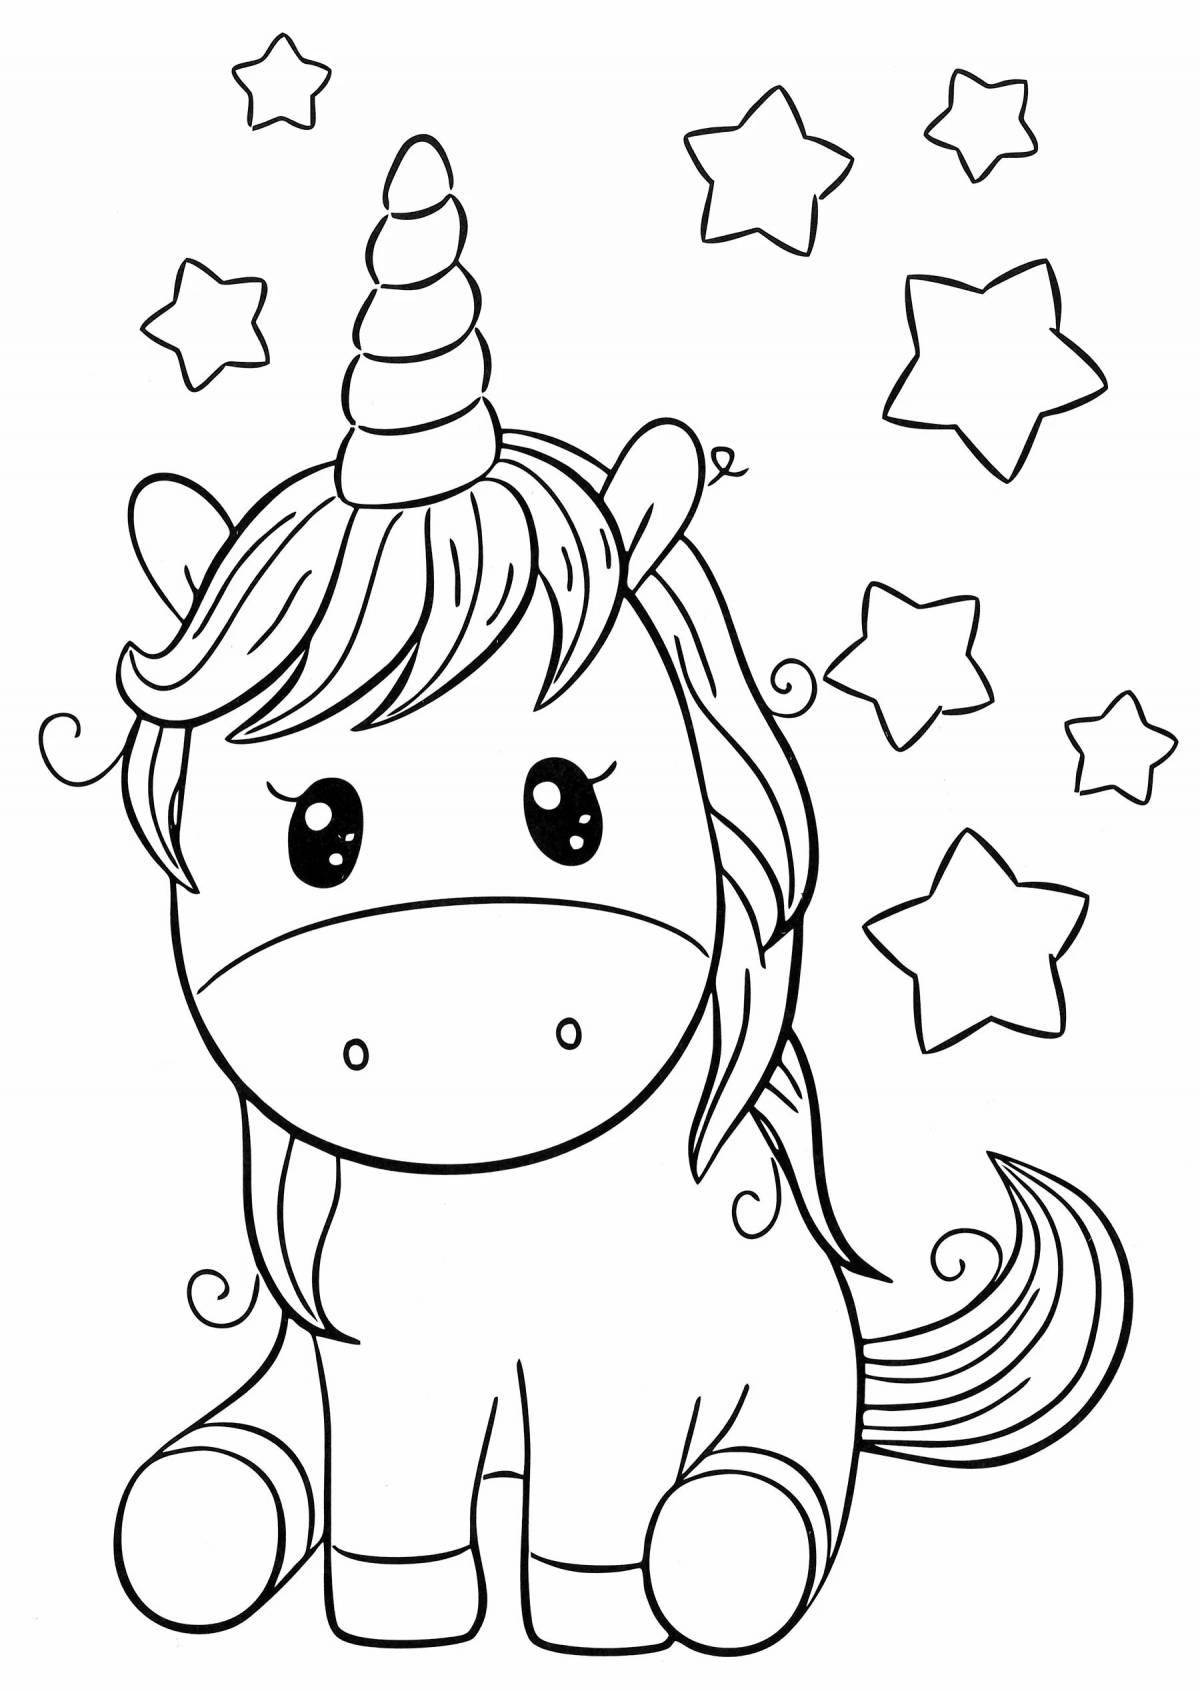 Exotic coloring book for girls 7 years old unicorn